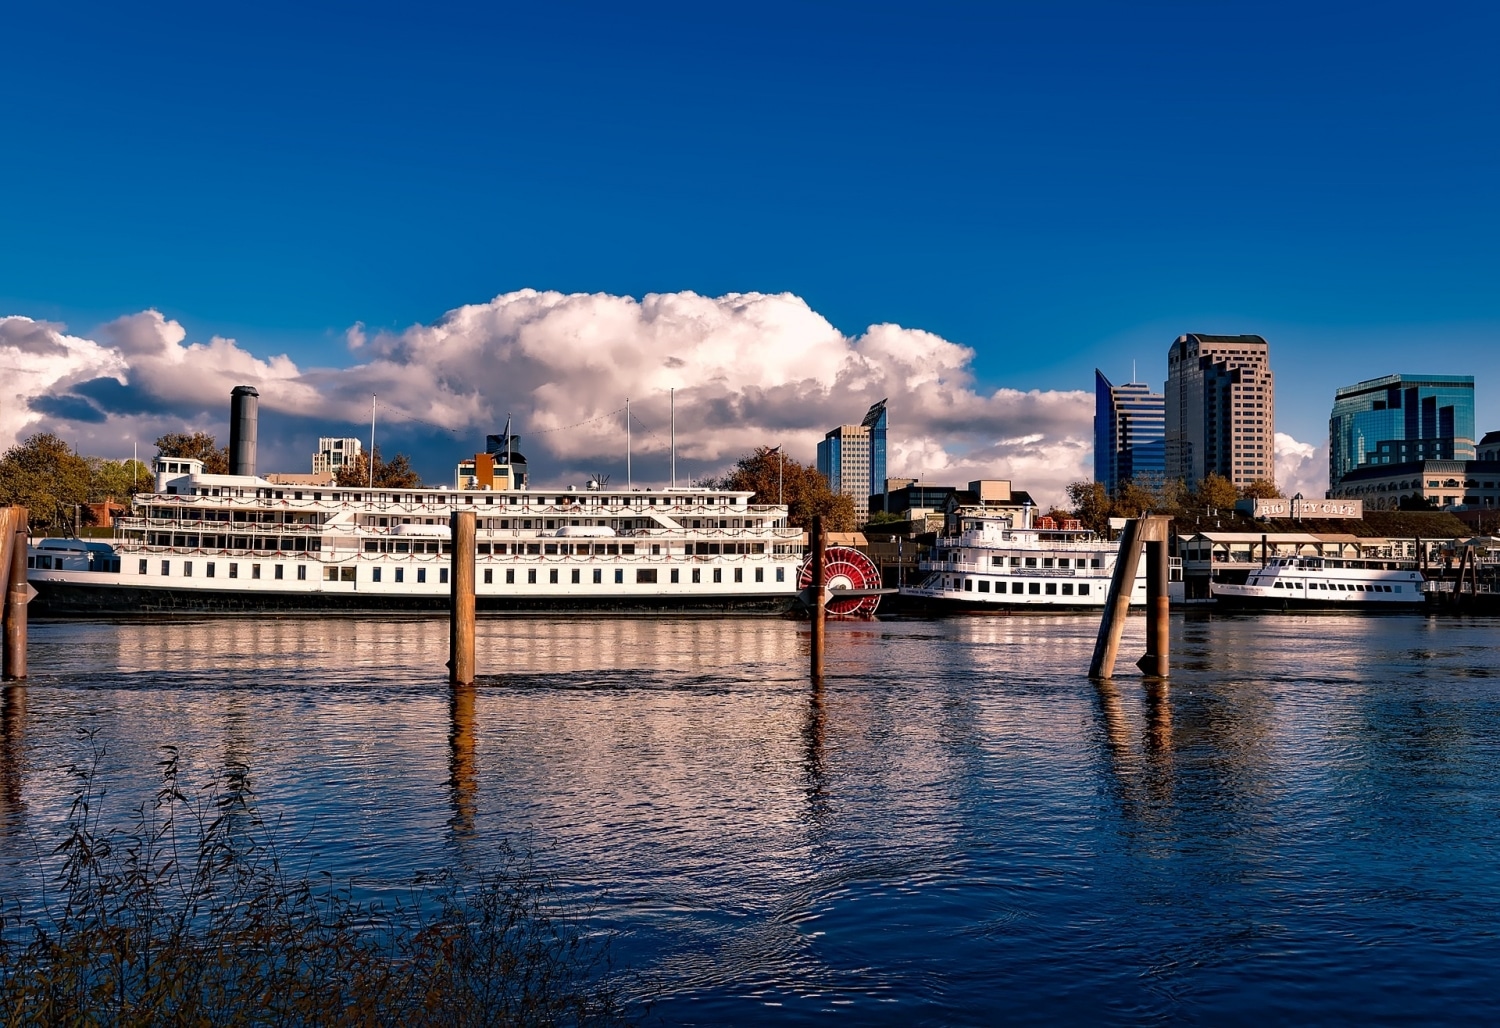 Image of boats floating in water in the city of Sacramento California